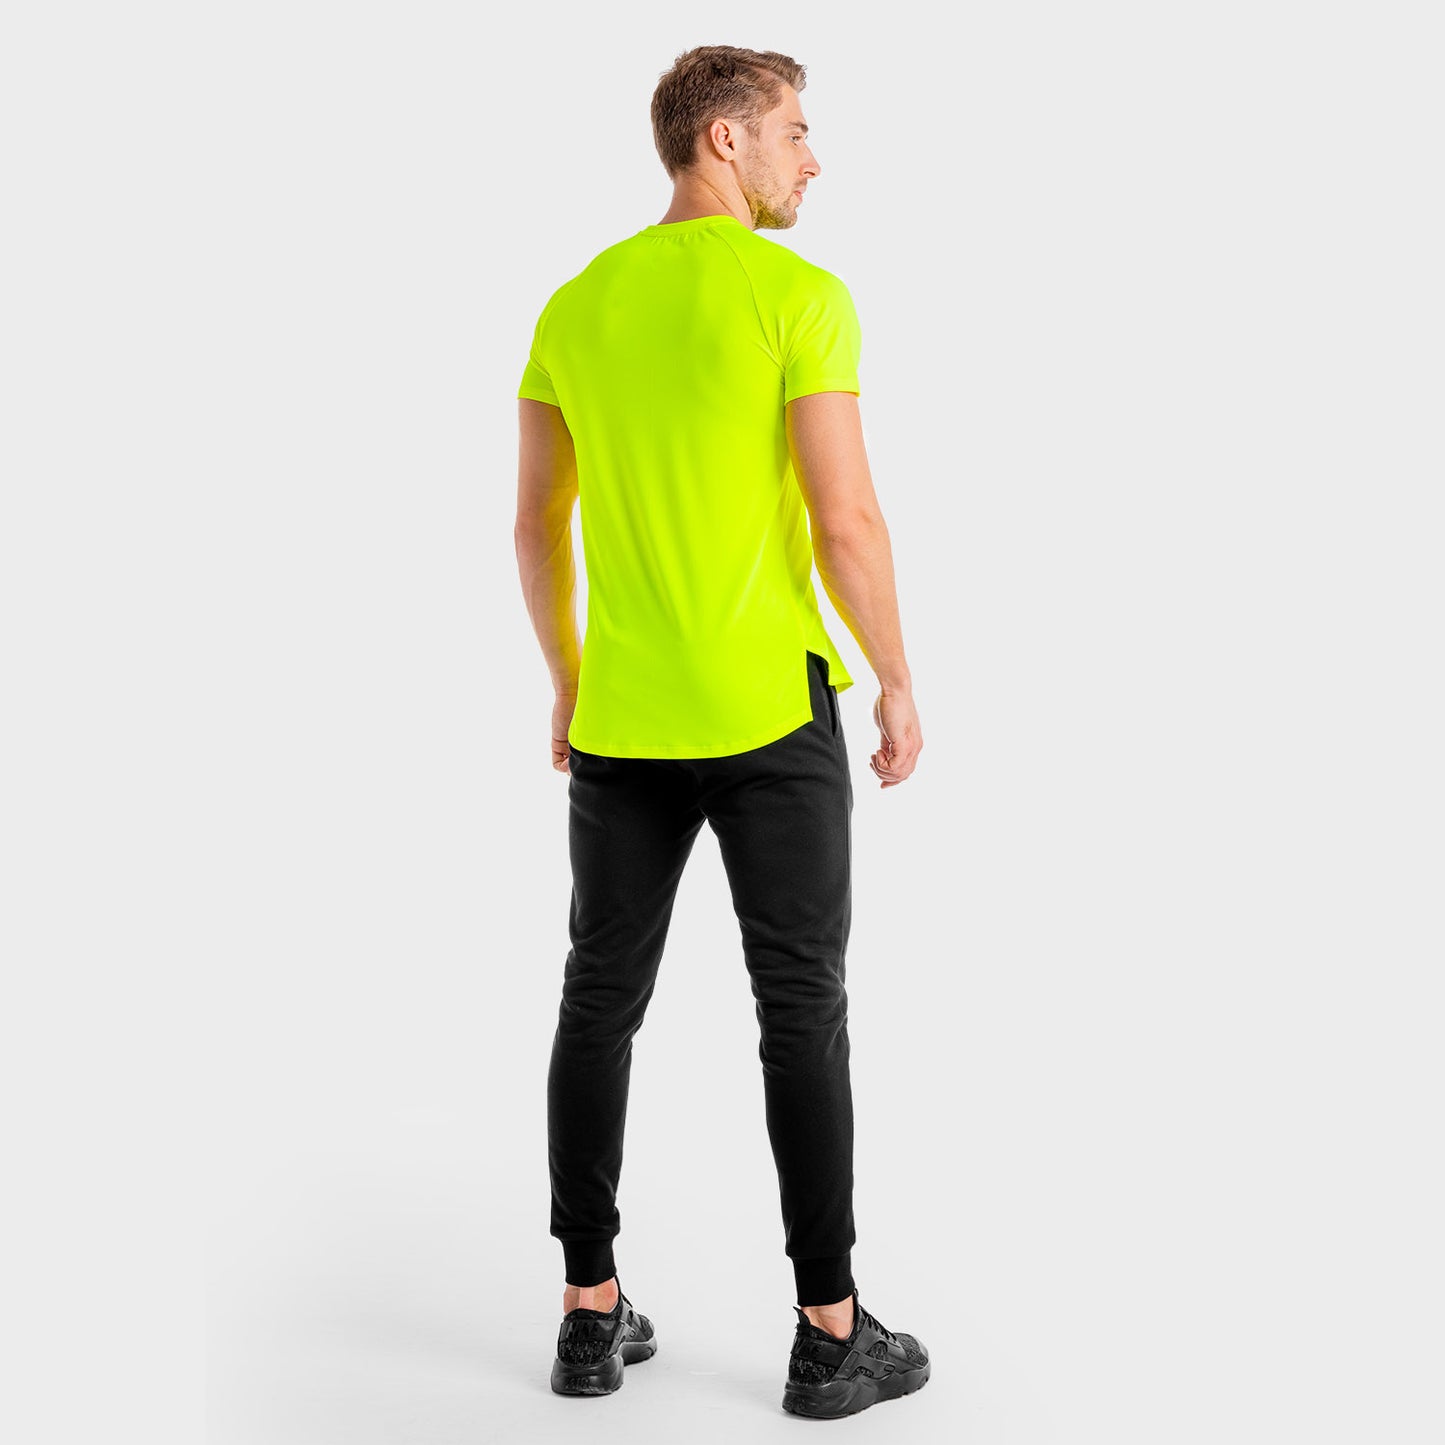 squatwolf-gym-wear-core-mesh-tee-neon-workout-shirts-for-men